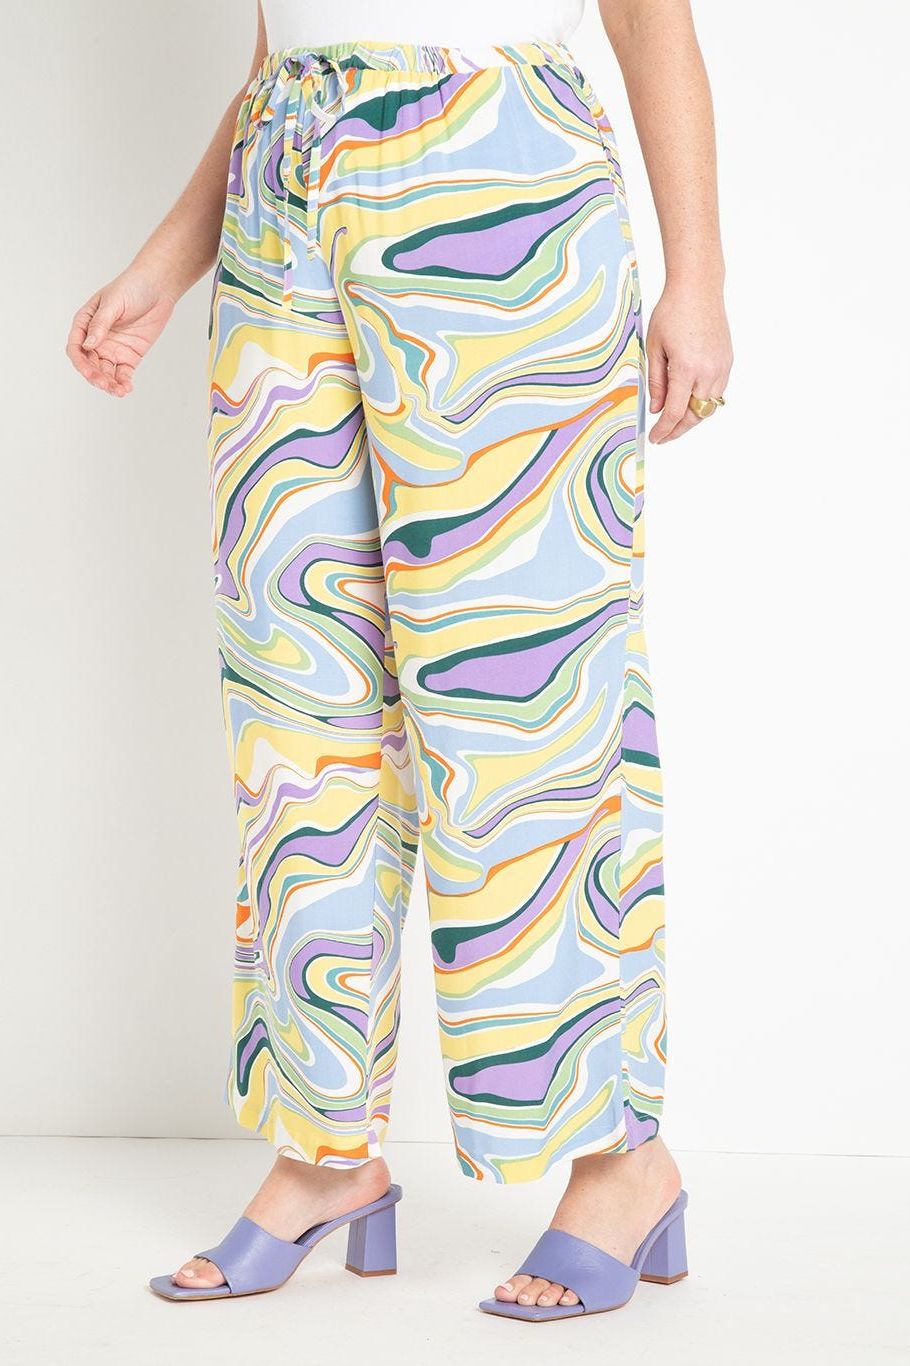 15 Best Patterned Pants to Shop in 2023 — Cute, Colorful Pants